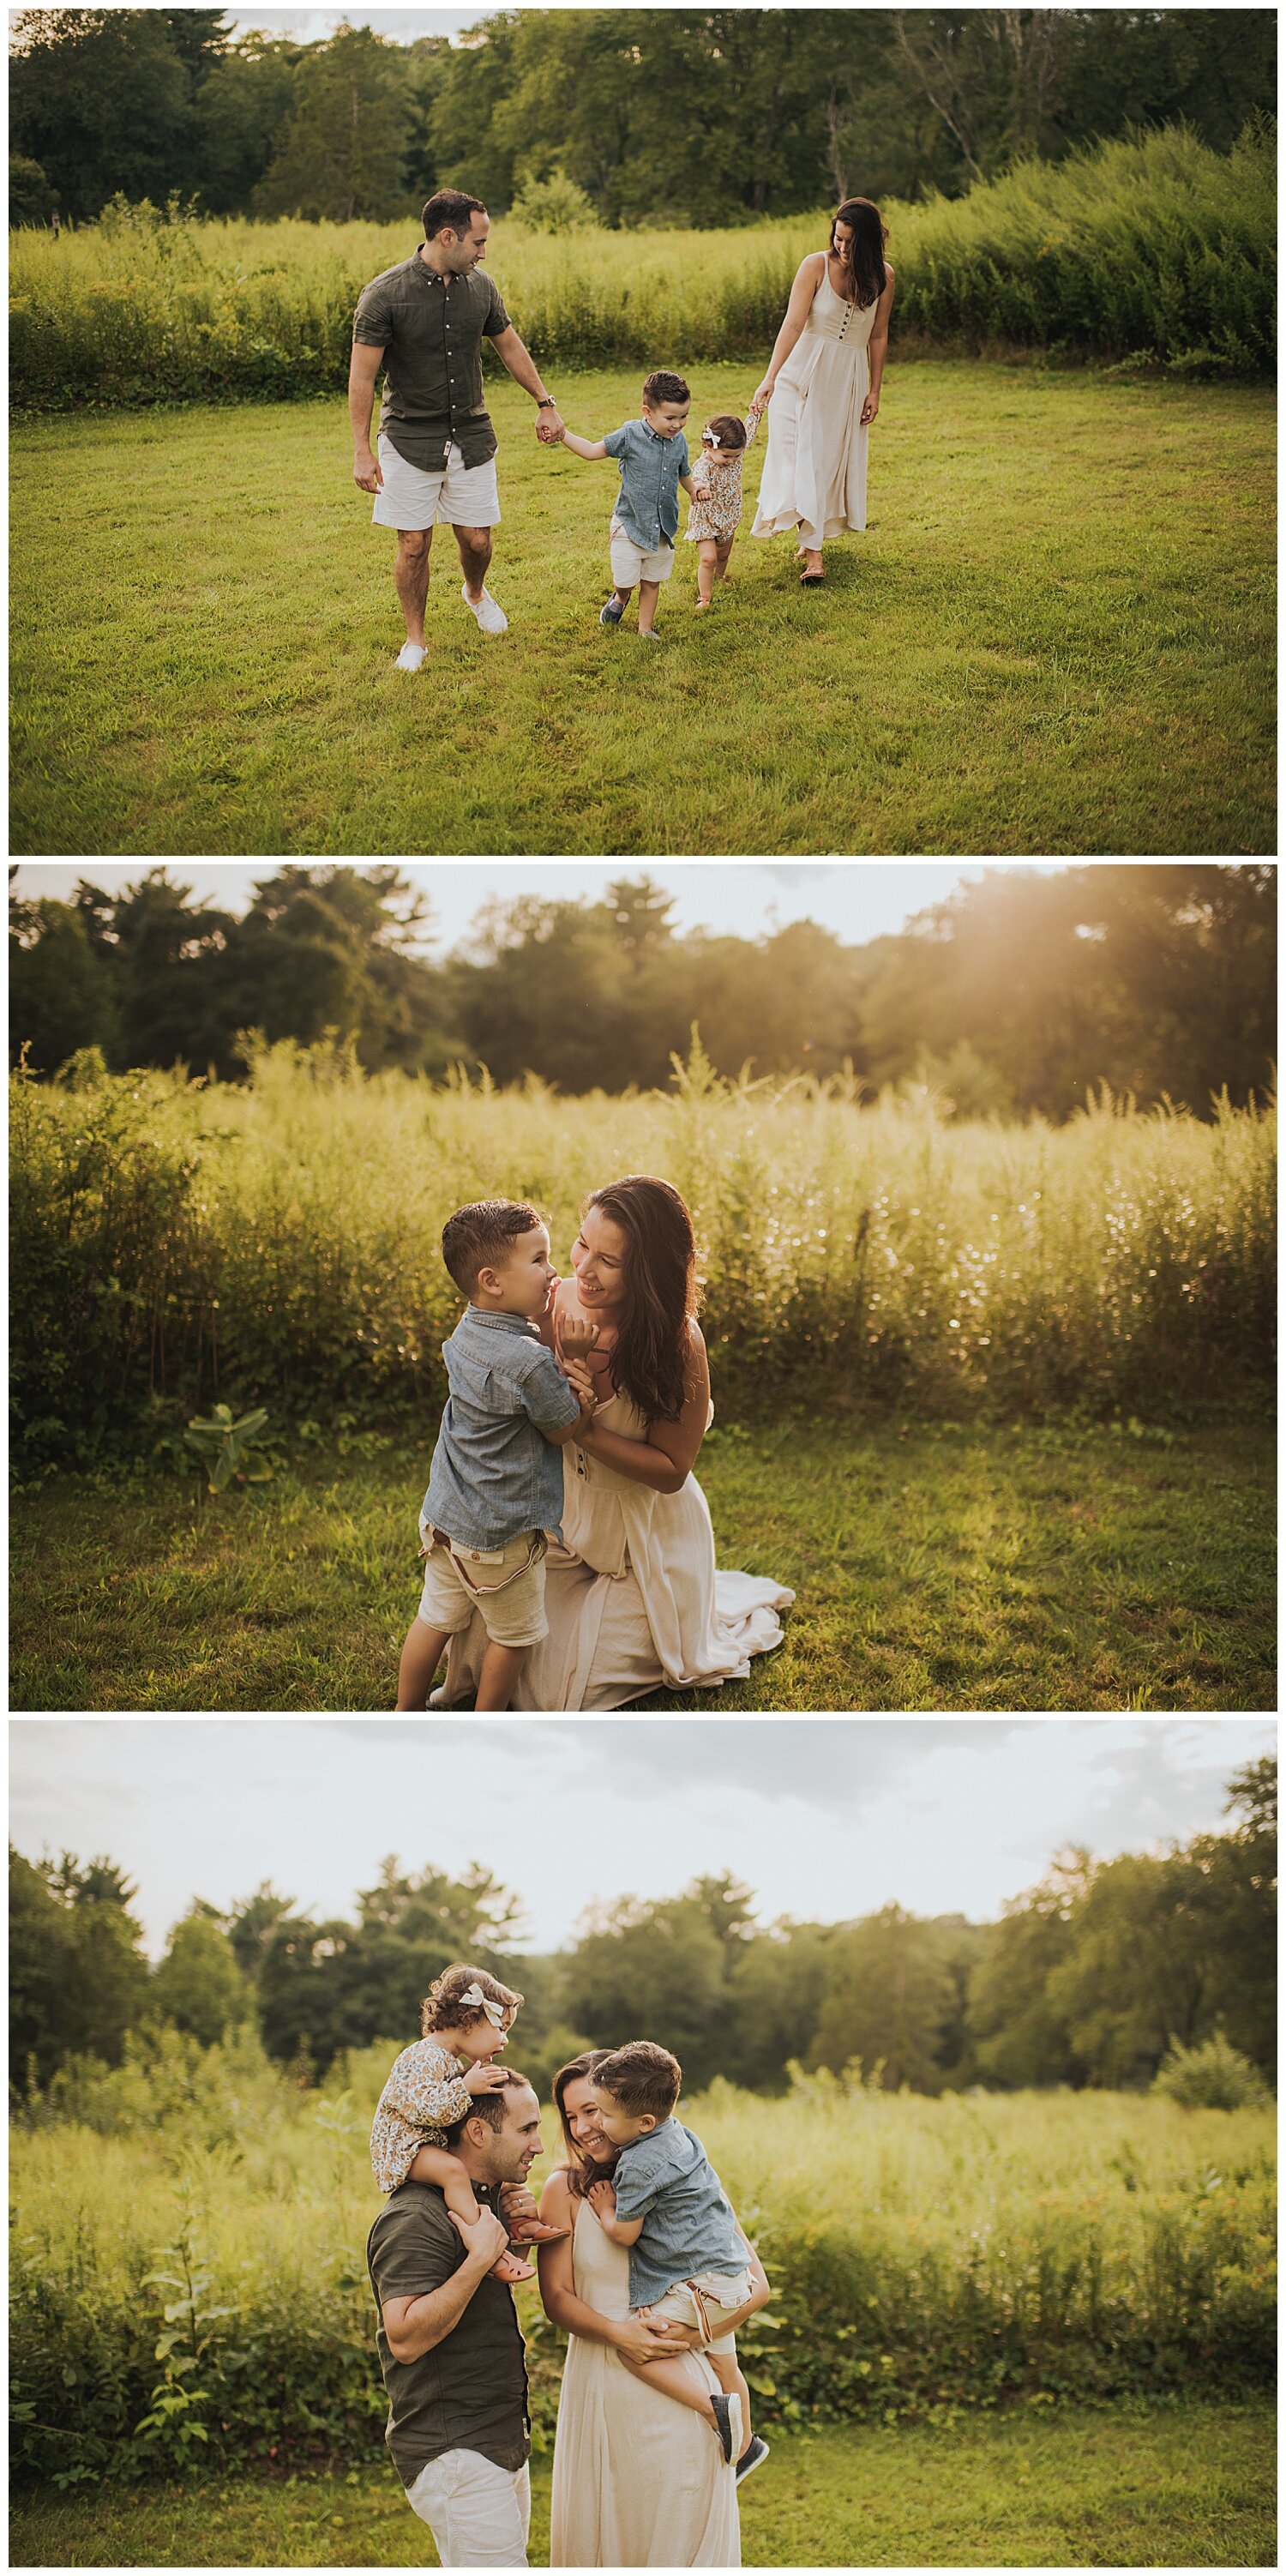 Fairfield County, Ct Maternity, Newborn and Family photographer Connecticut: Kendra Conroy Photography